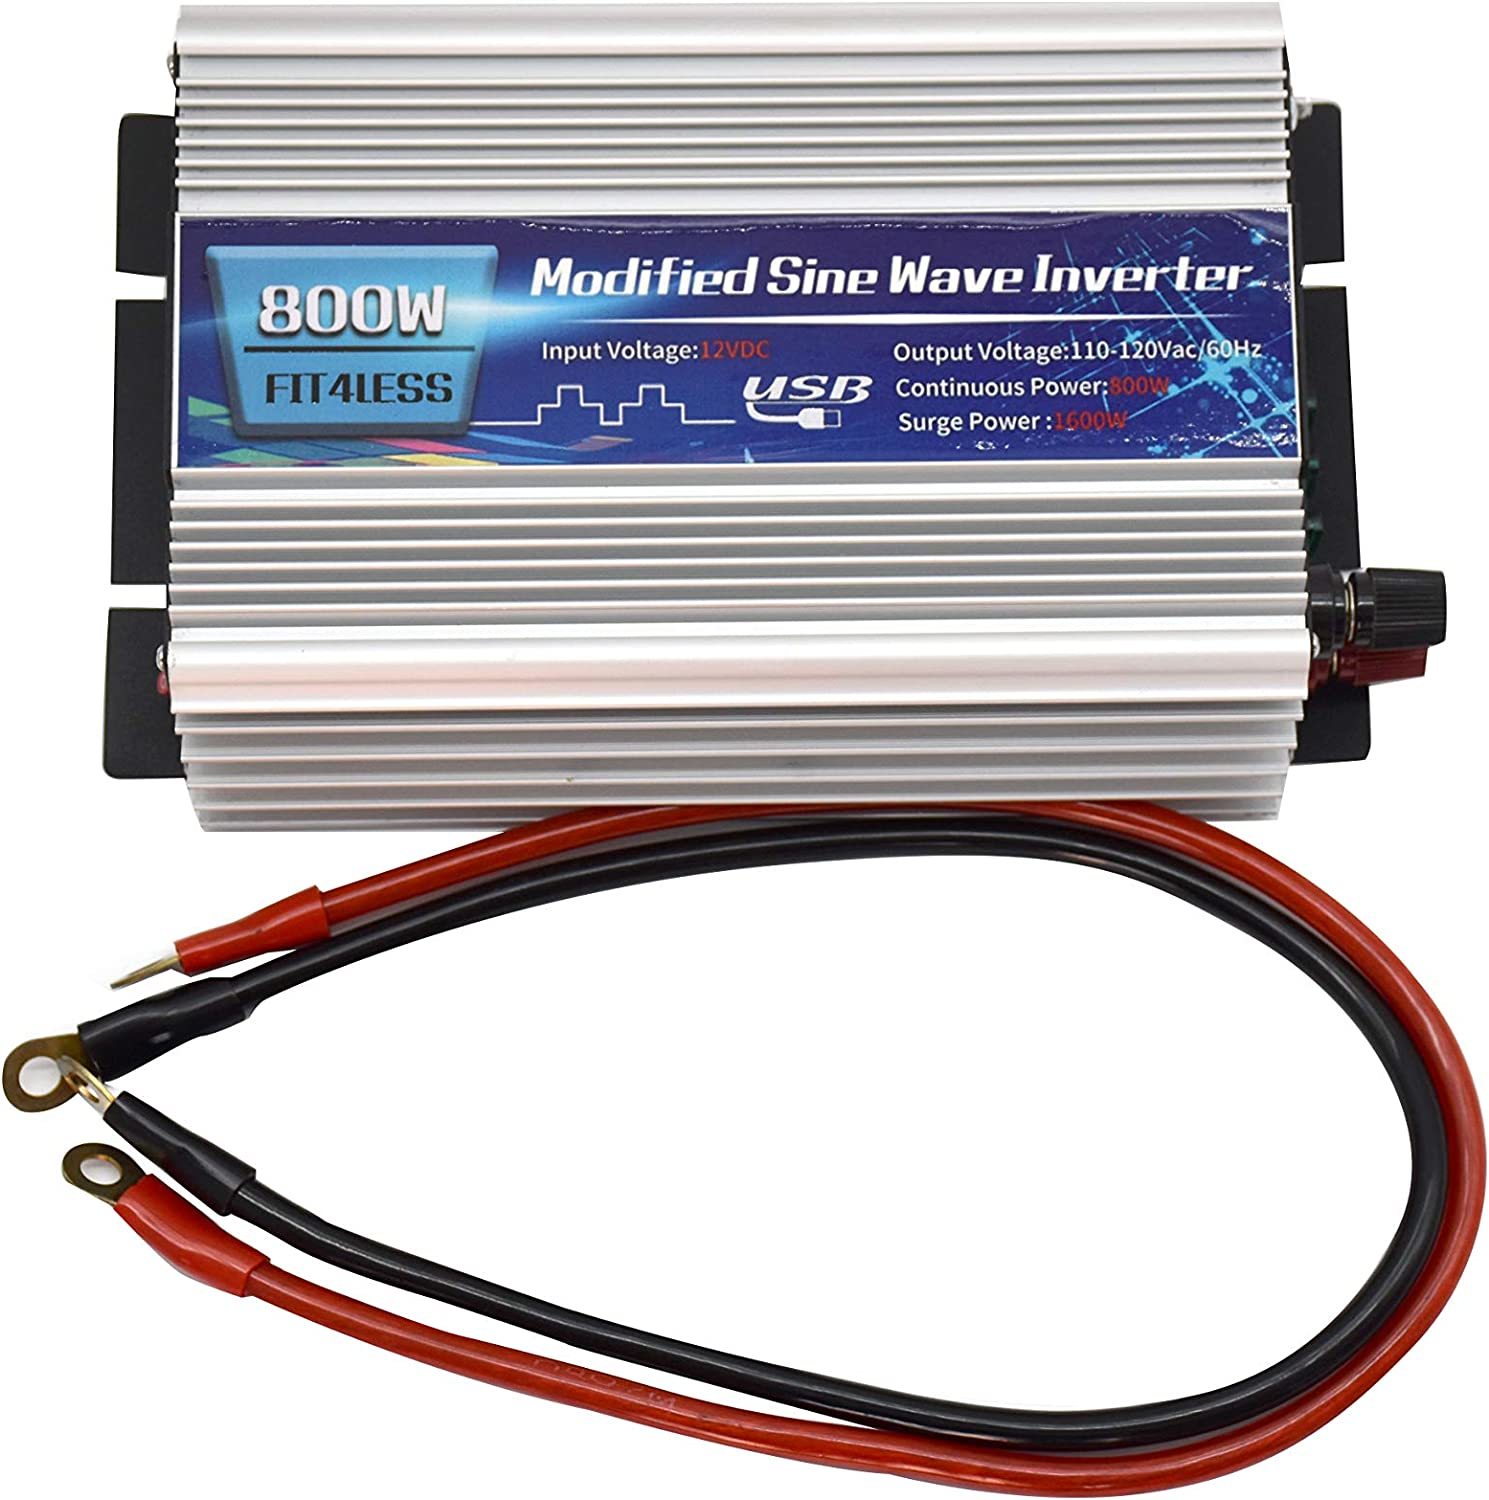 Primary image for Power Inverter 800W With Dual Sockets, Usb5V 2000Ma Input And, Dc12V Or 24V.